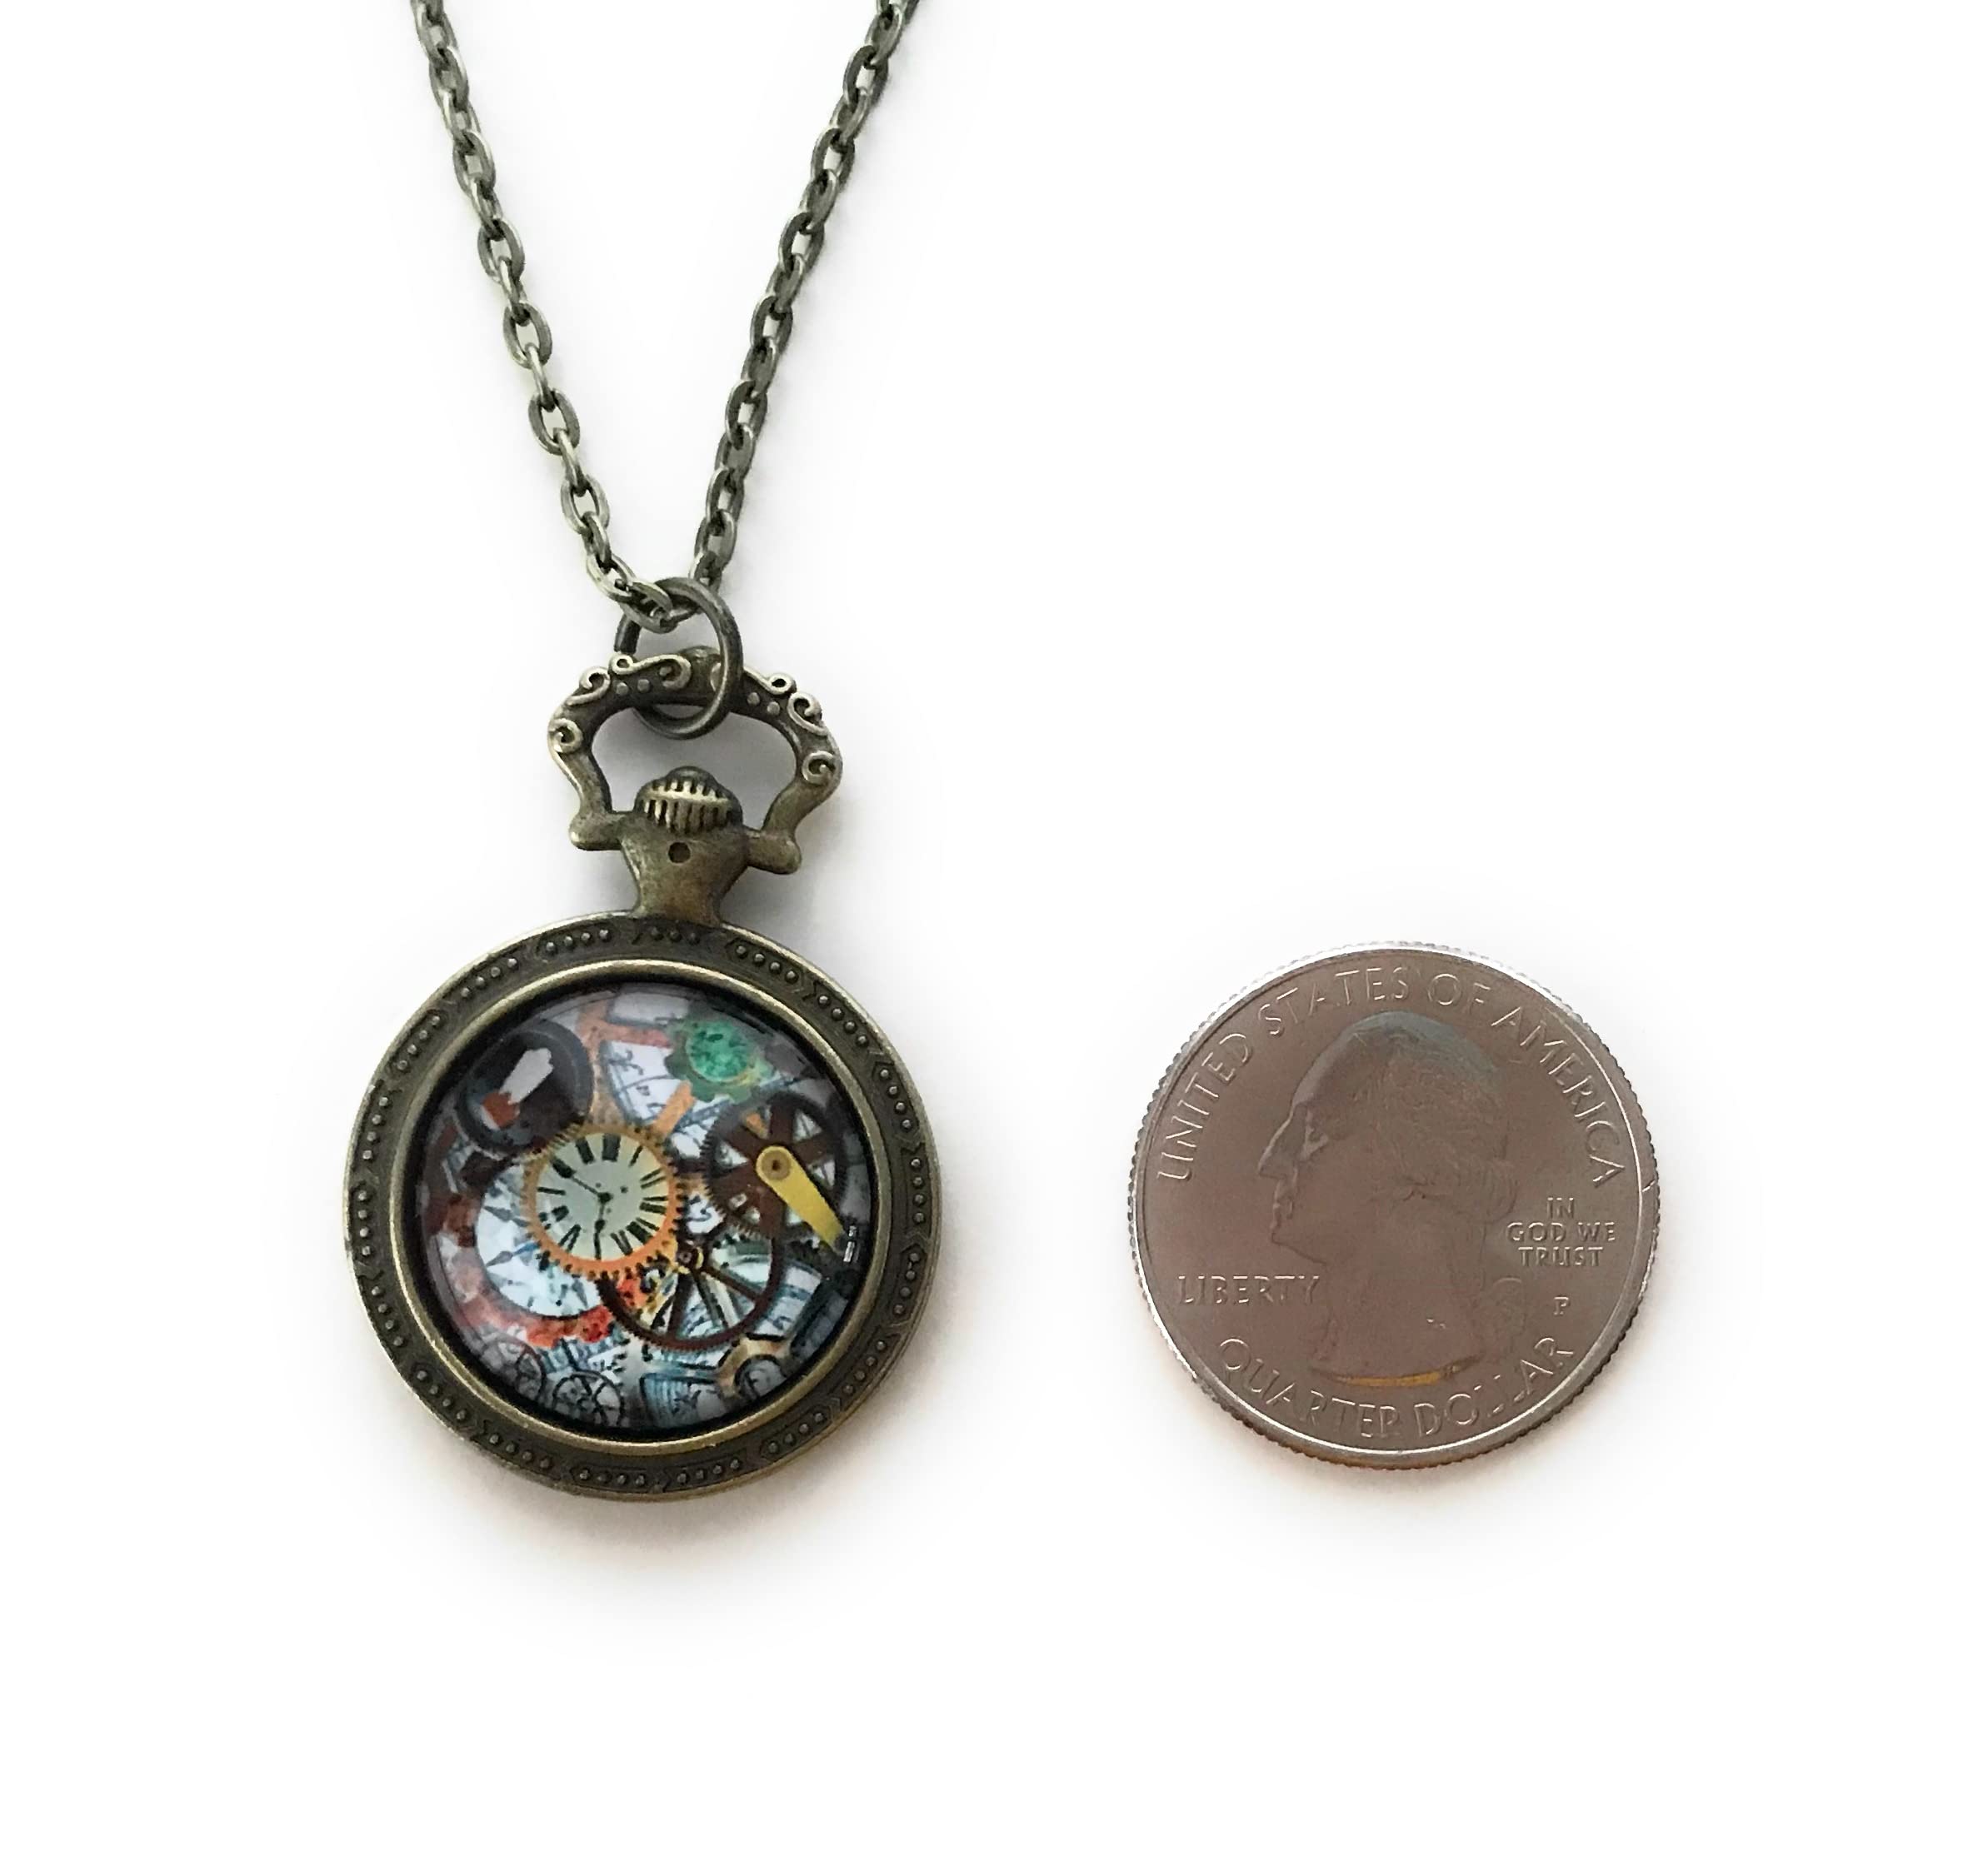 Steampunk Necklace | Colorful Gear Image Cabochon Pocket Watch Pendant Setting - Handmade Jewelry